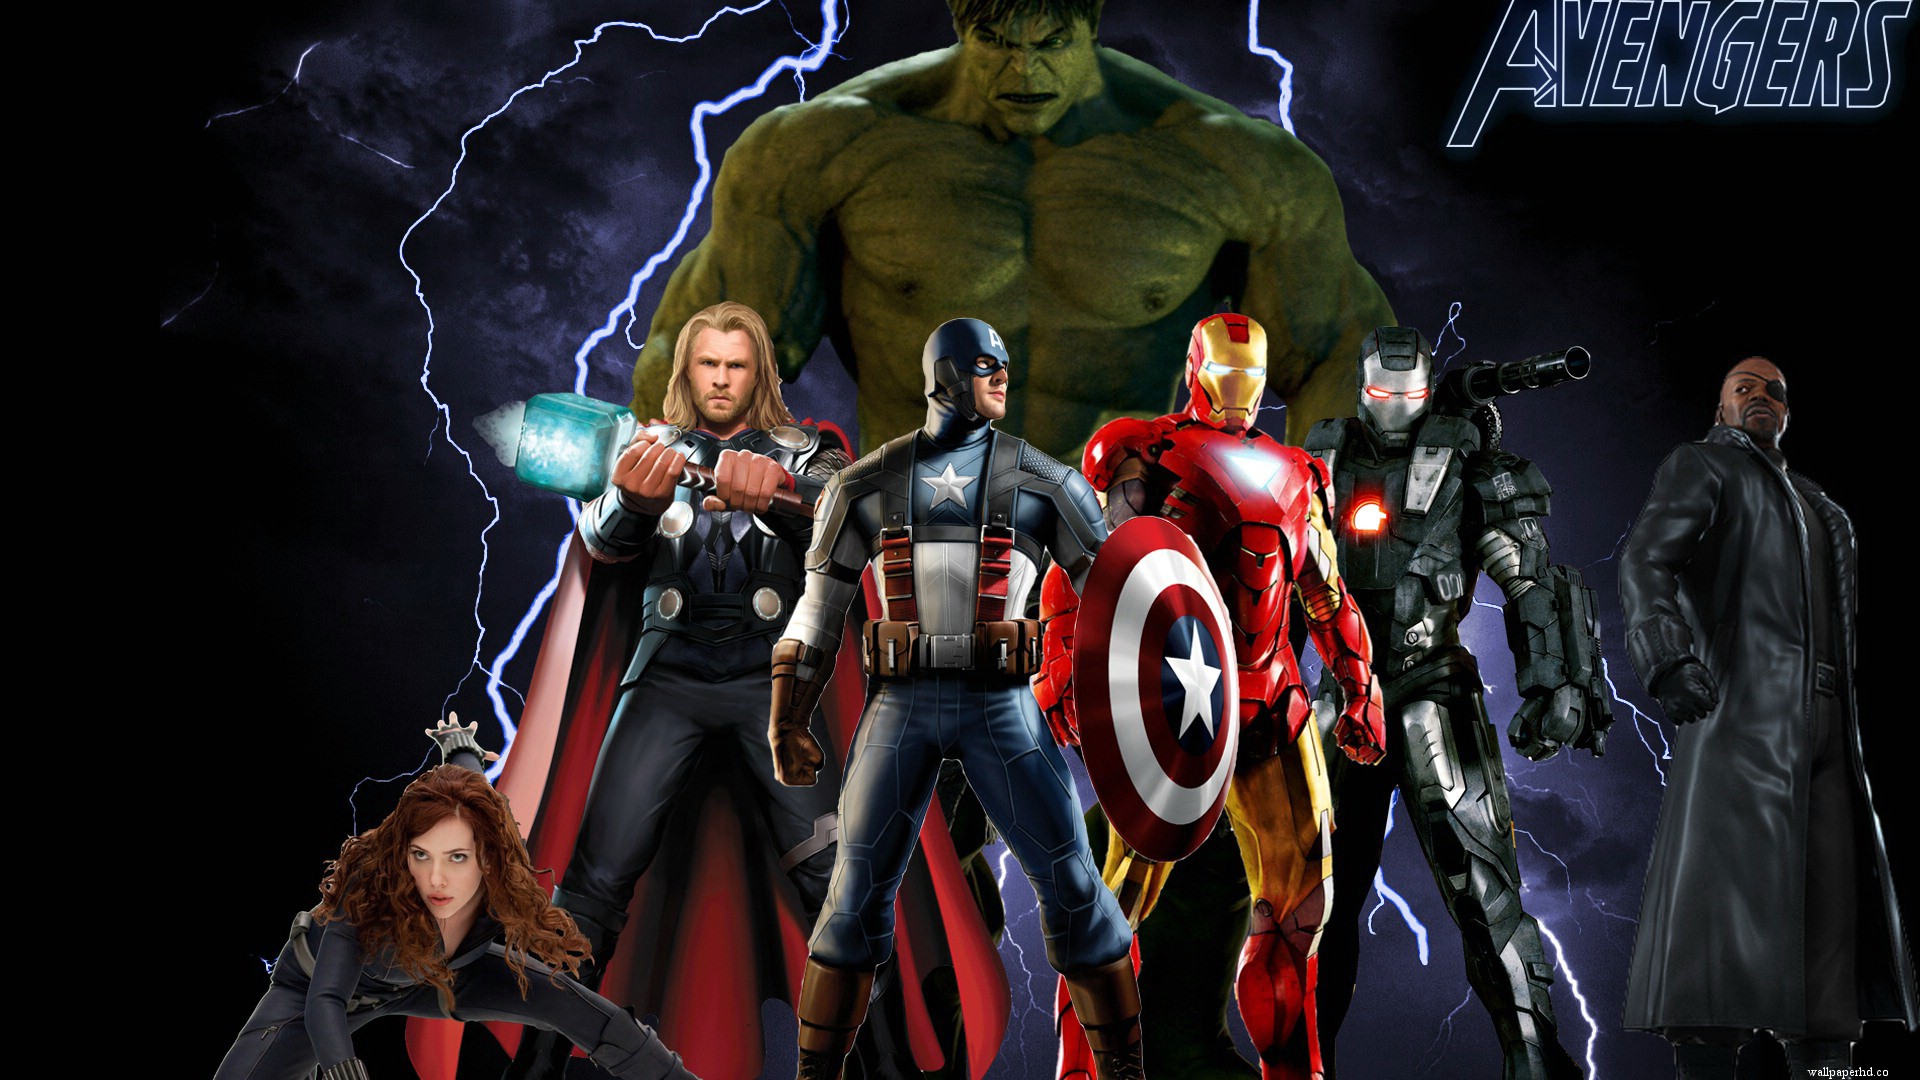 The Avengers Wallpapers HD Movie Wallpapers The Avengers Wallpapers 1920x1080